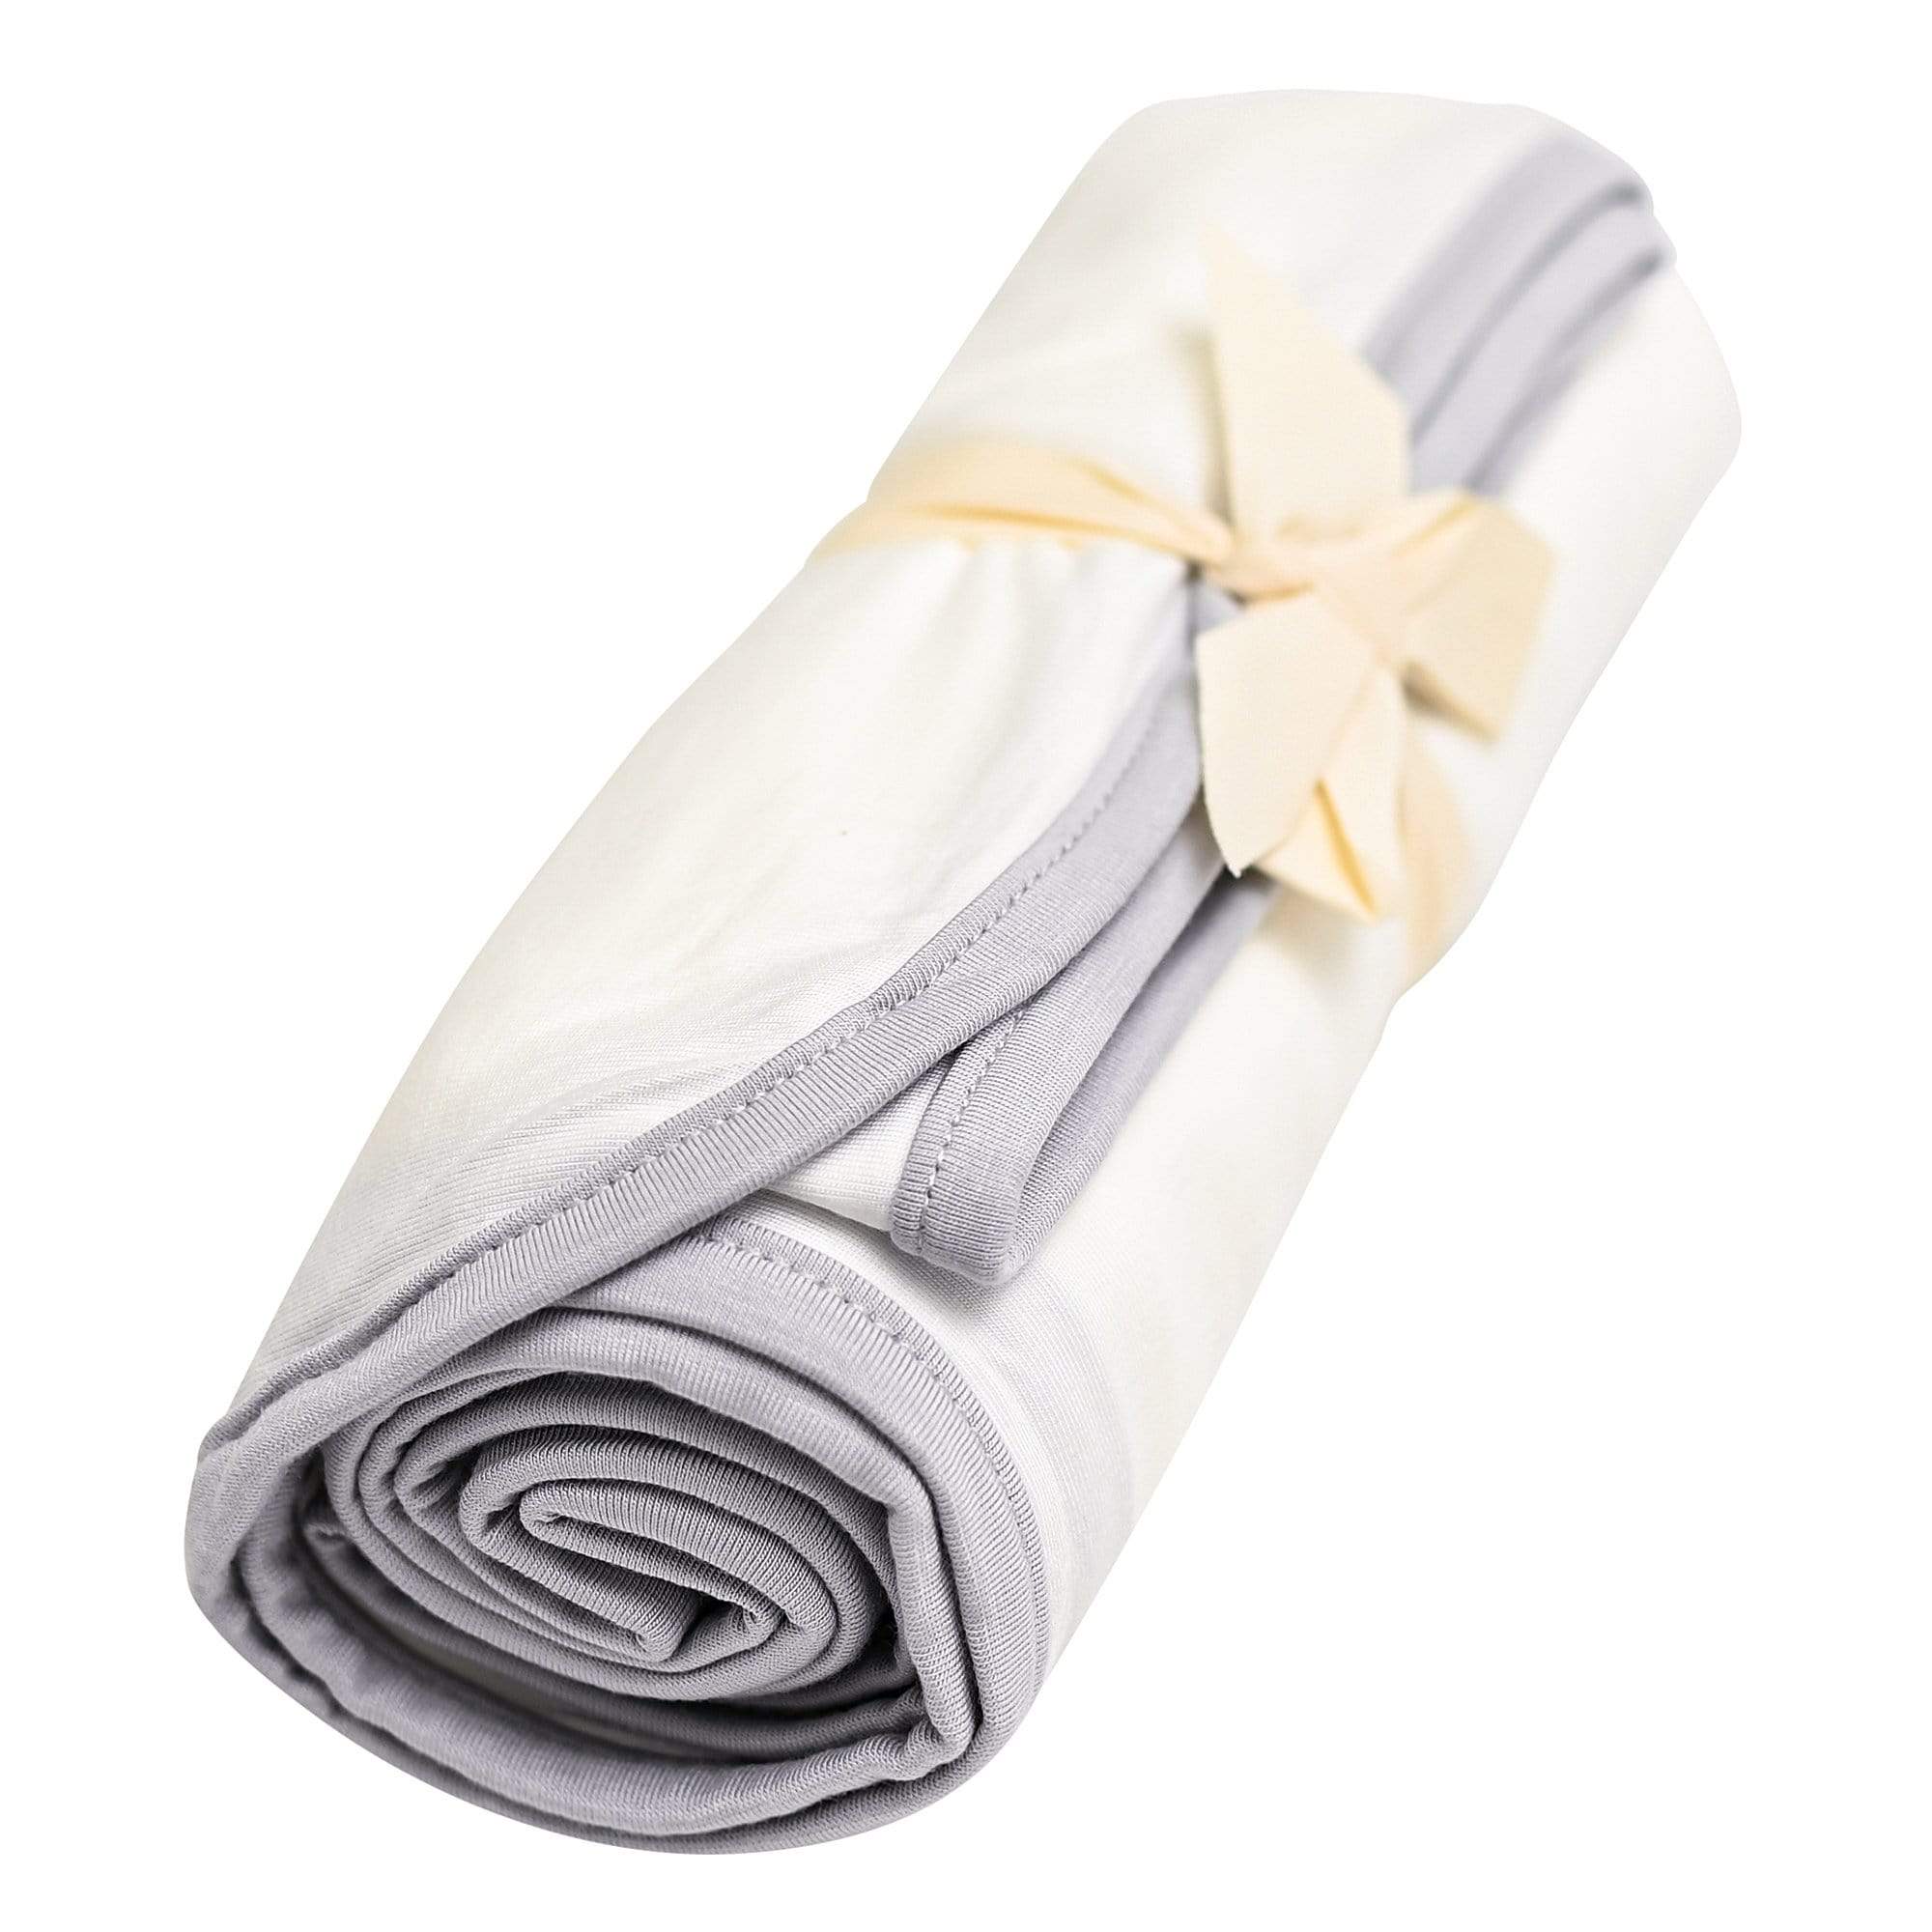 Kyte Baby bamboo infant Swaddling Blanket in Cloud with Storm Trim